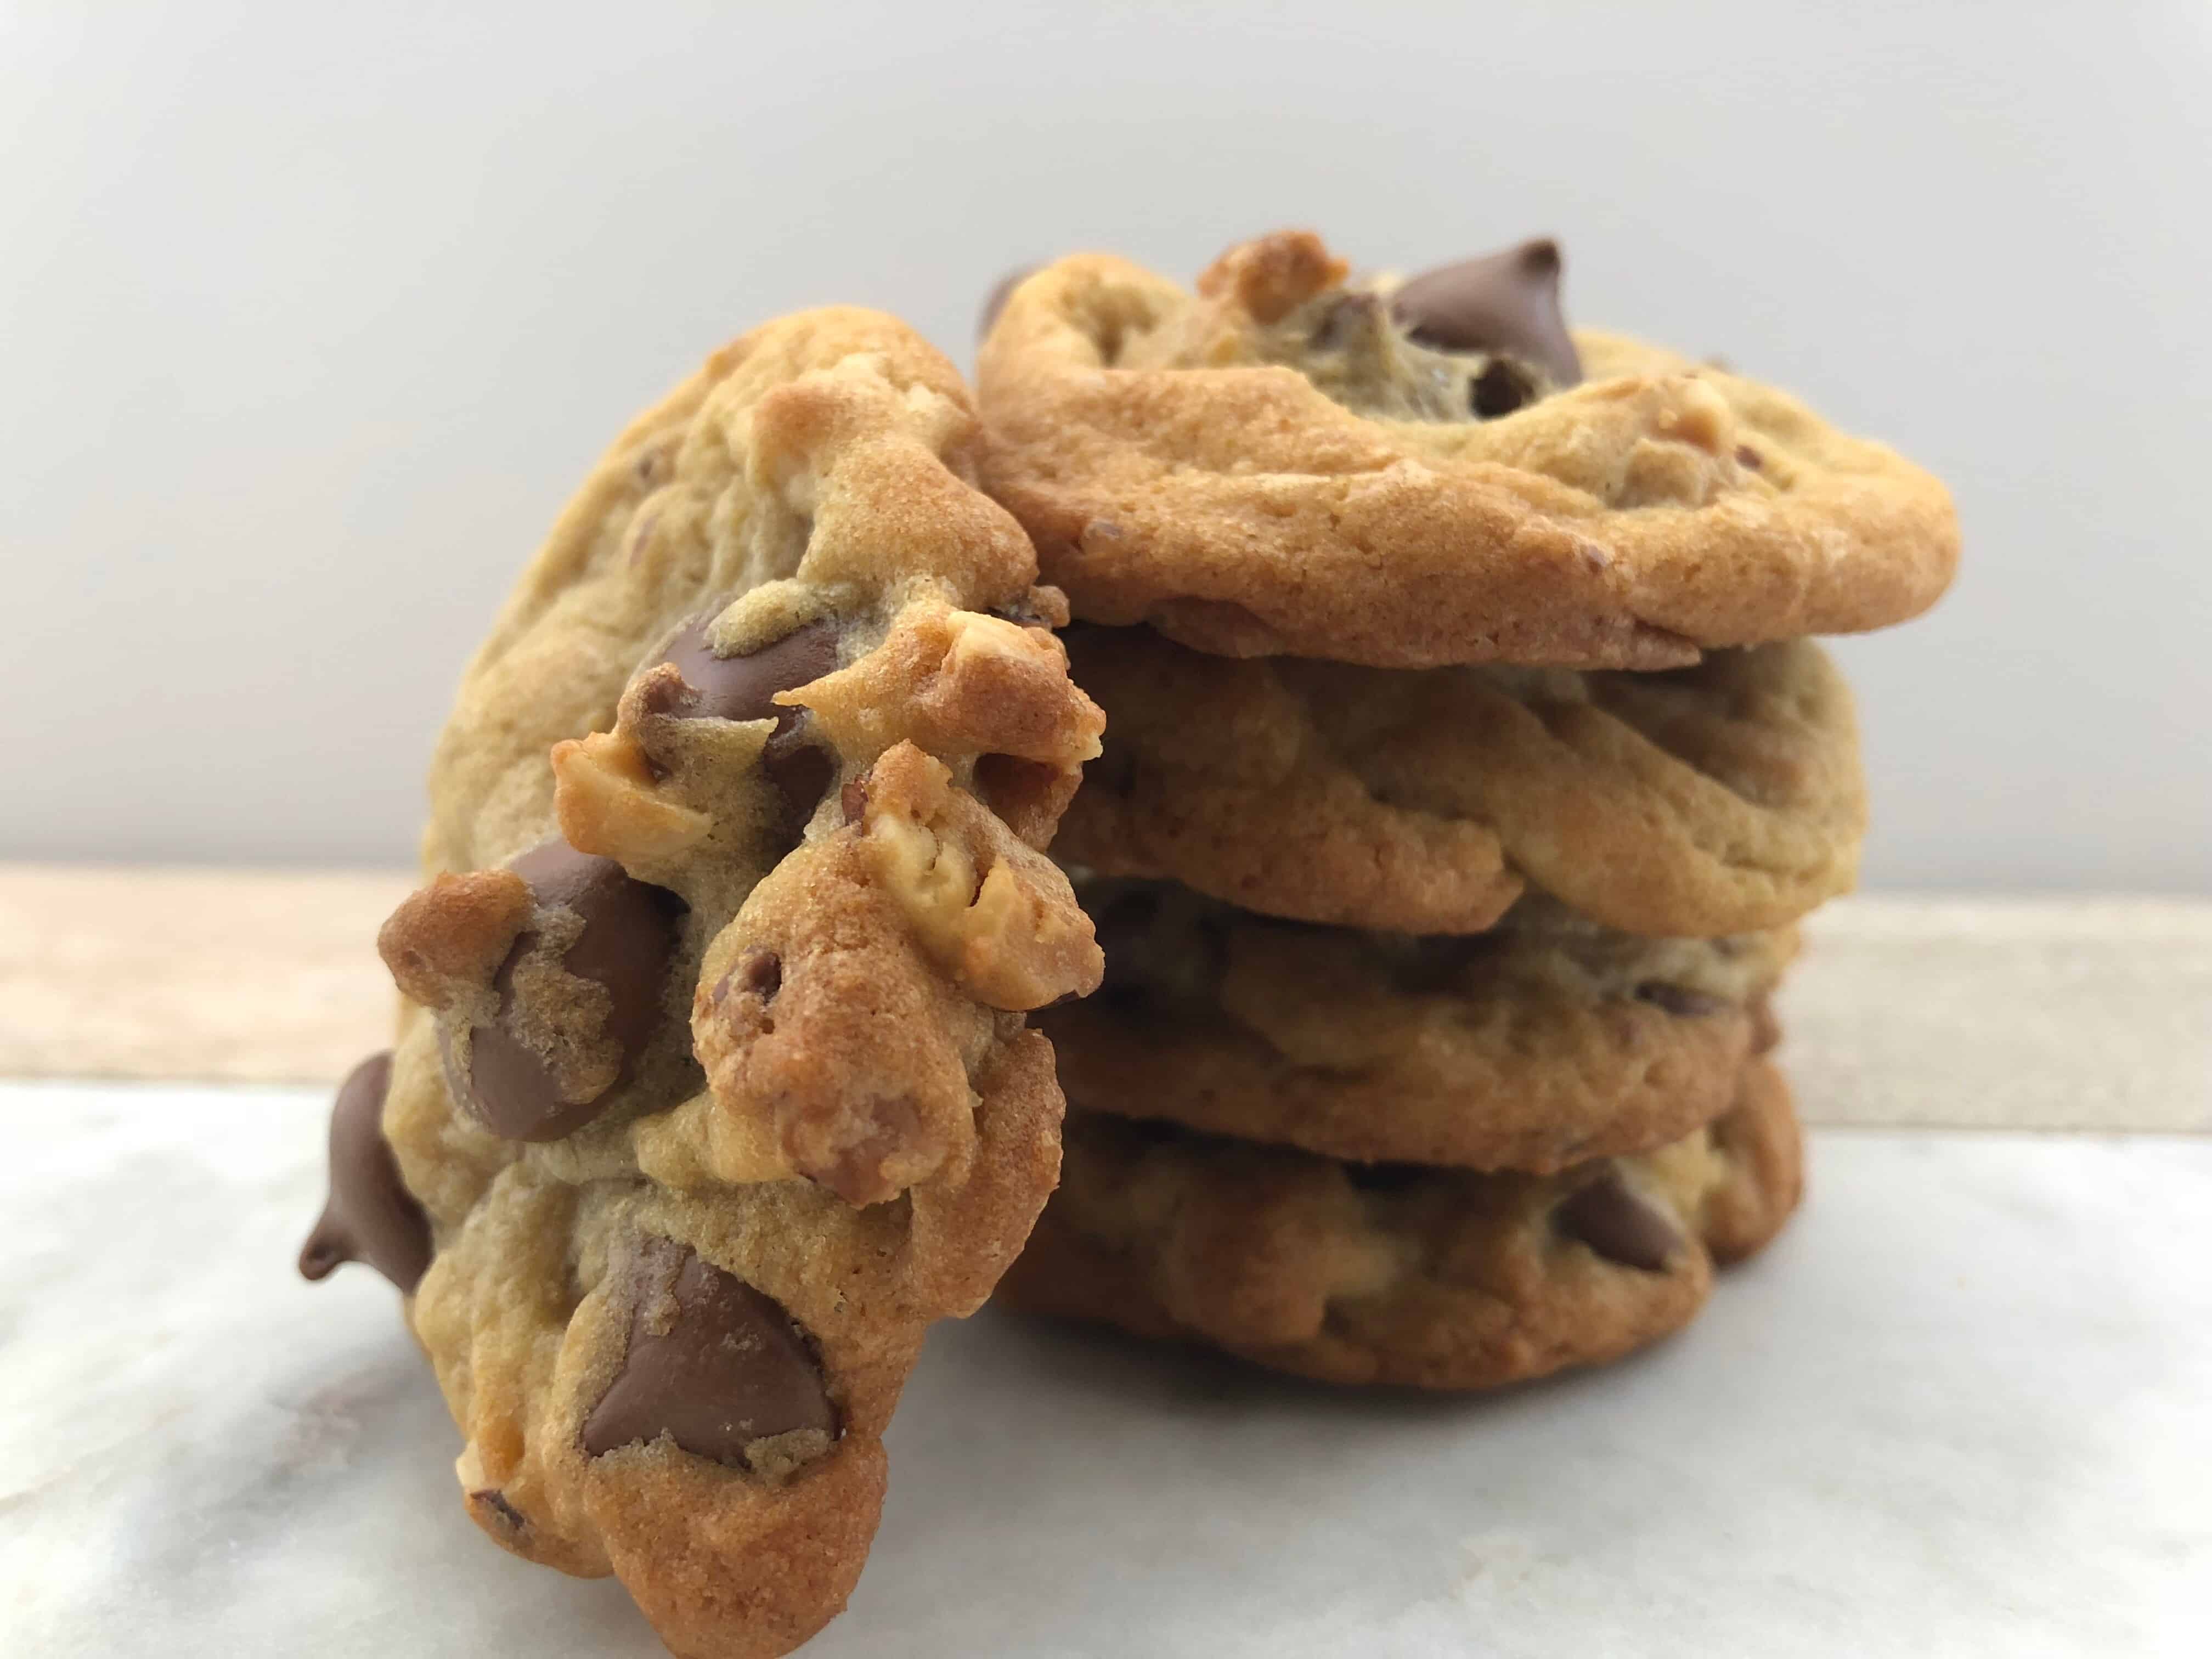 https://www.mapleandthyme.com/wp-content/uploads/2018/02/Stack-of-Toasted-Hazelnut-and-Milk-Chocolate-Cookies.jpg